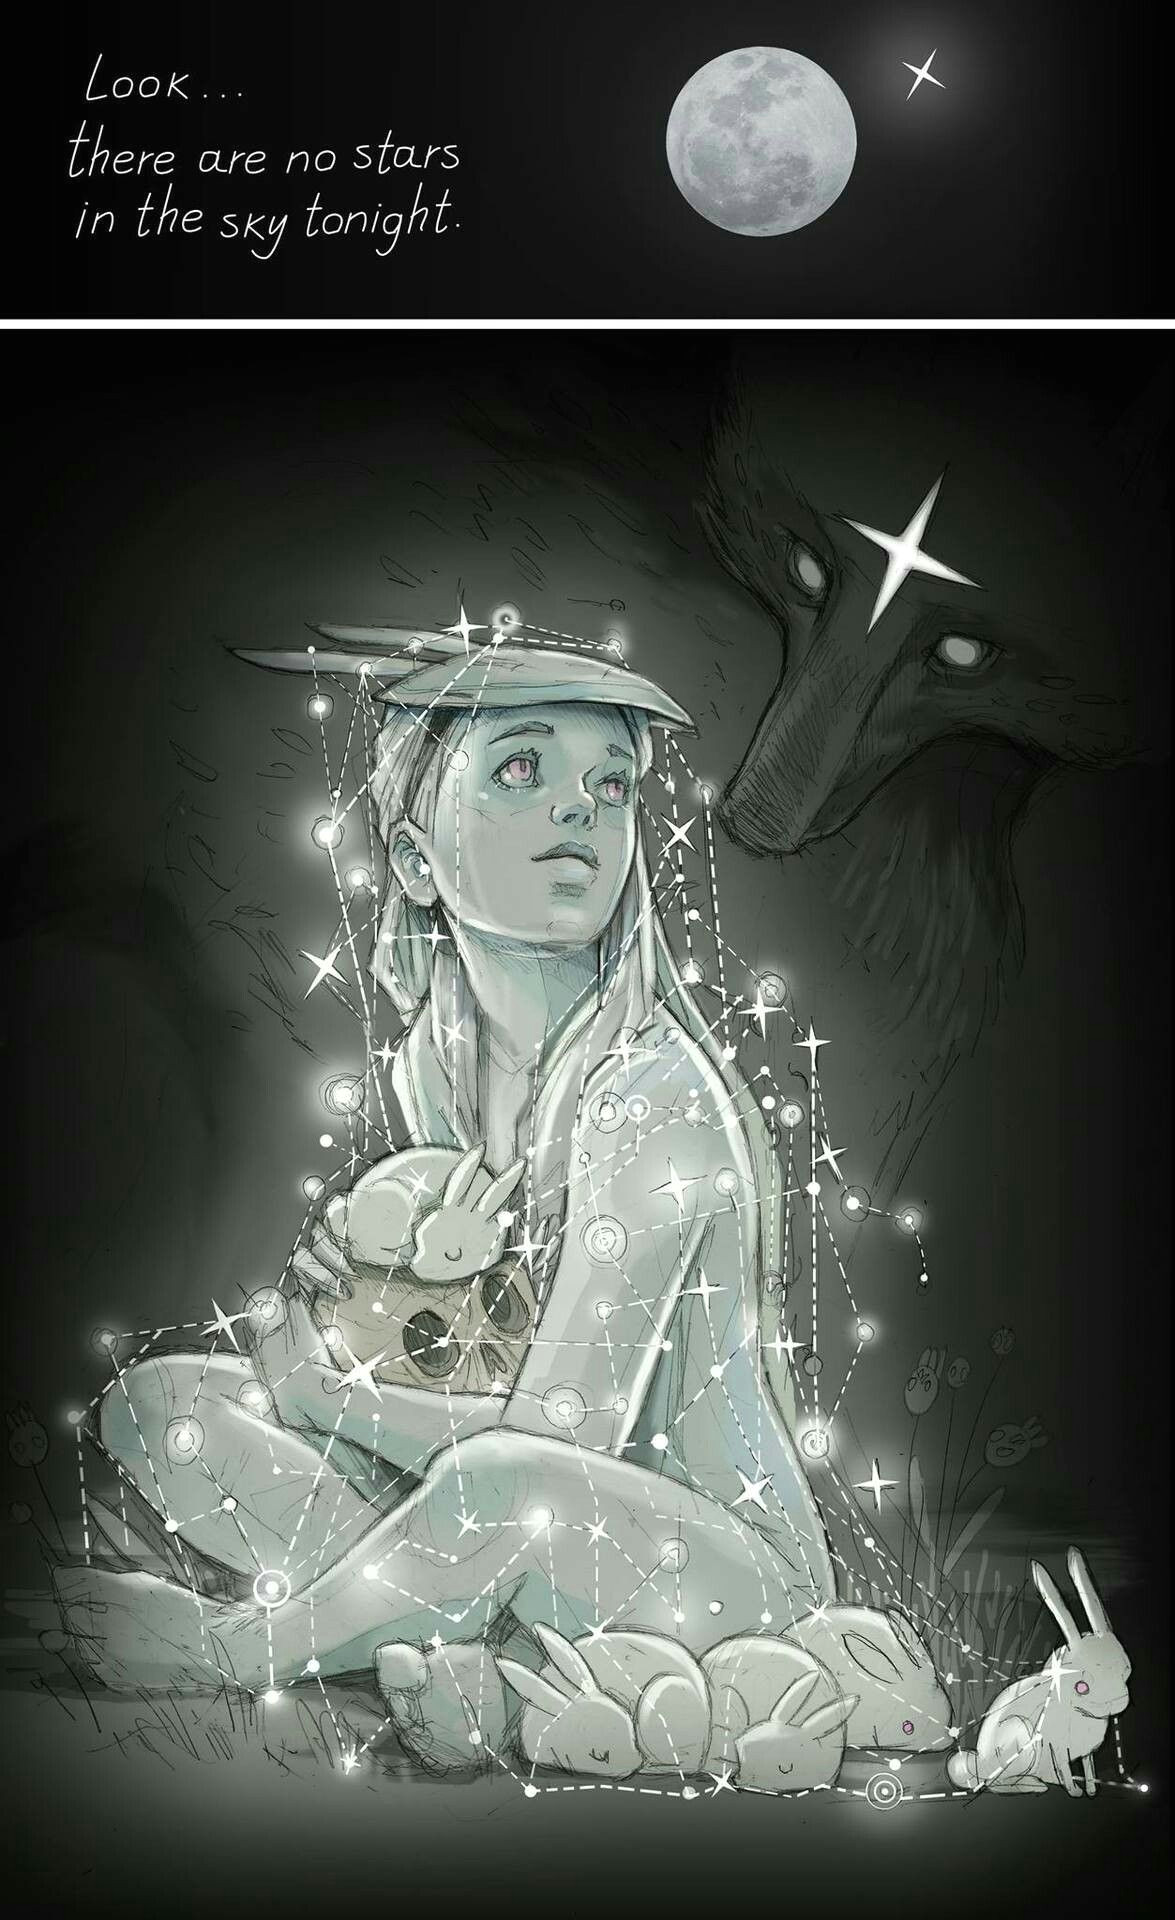 Drawing Of Girl Looking at Sky Pin by Erin Goss On Quack and Alice Inspiration In 2018 Pinterest